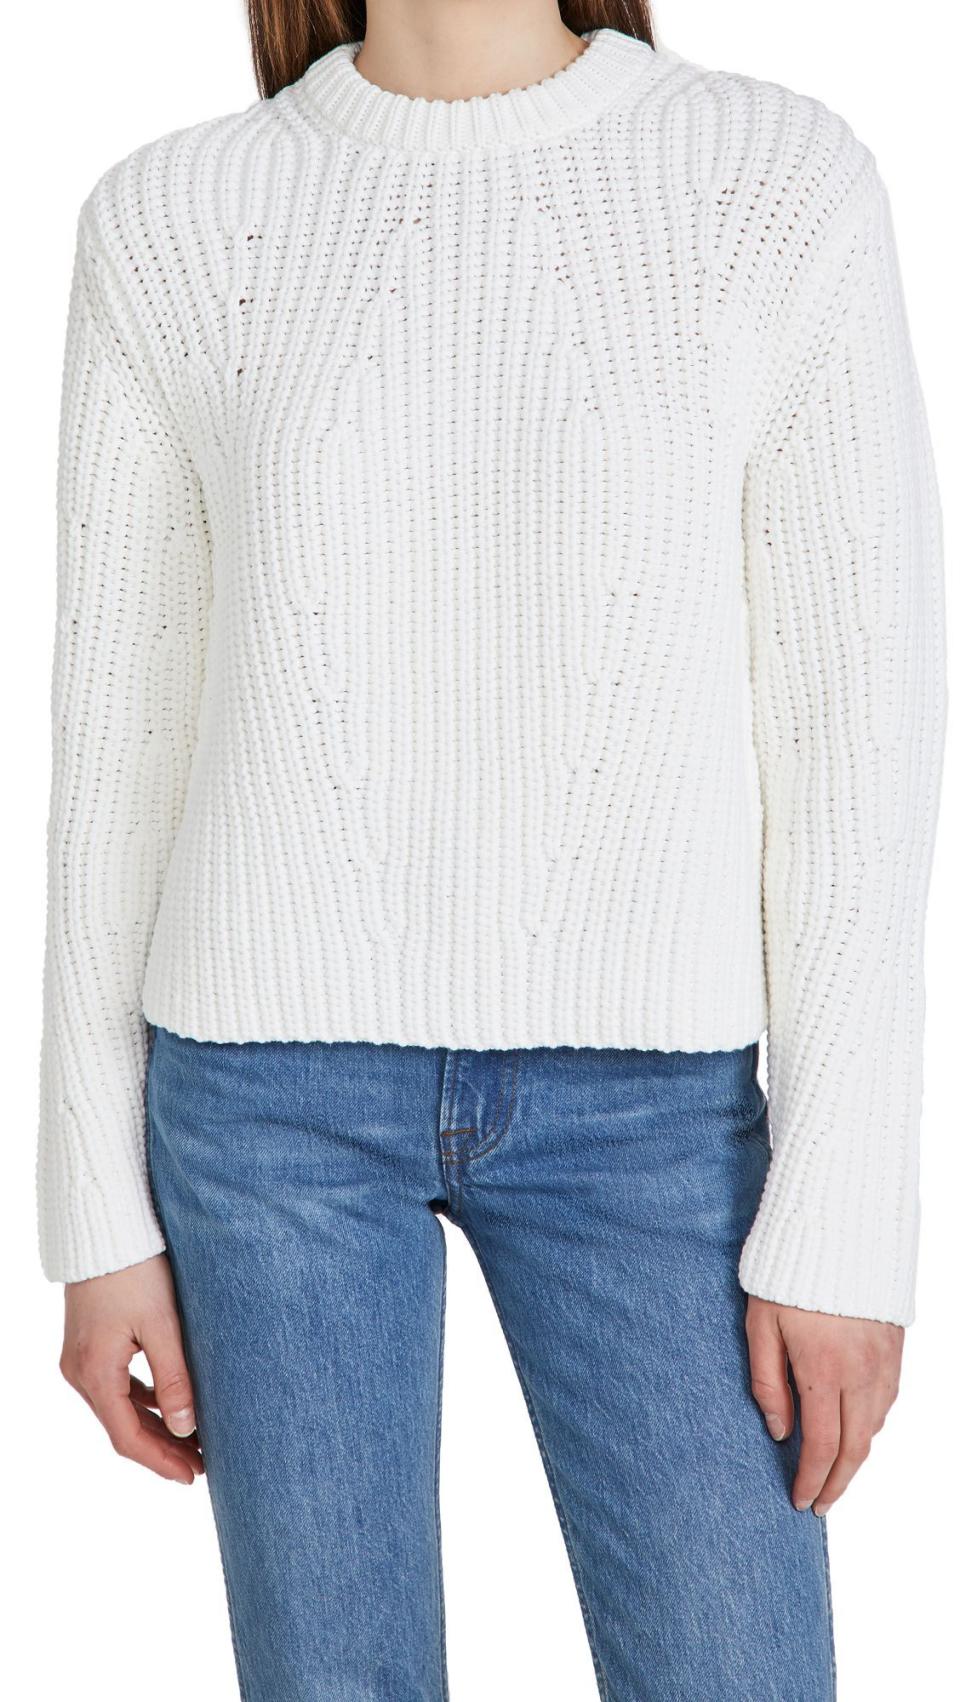 13) Vince Mirrored Rib Pullover Sweater